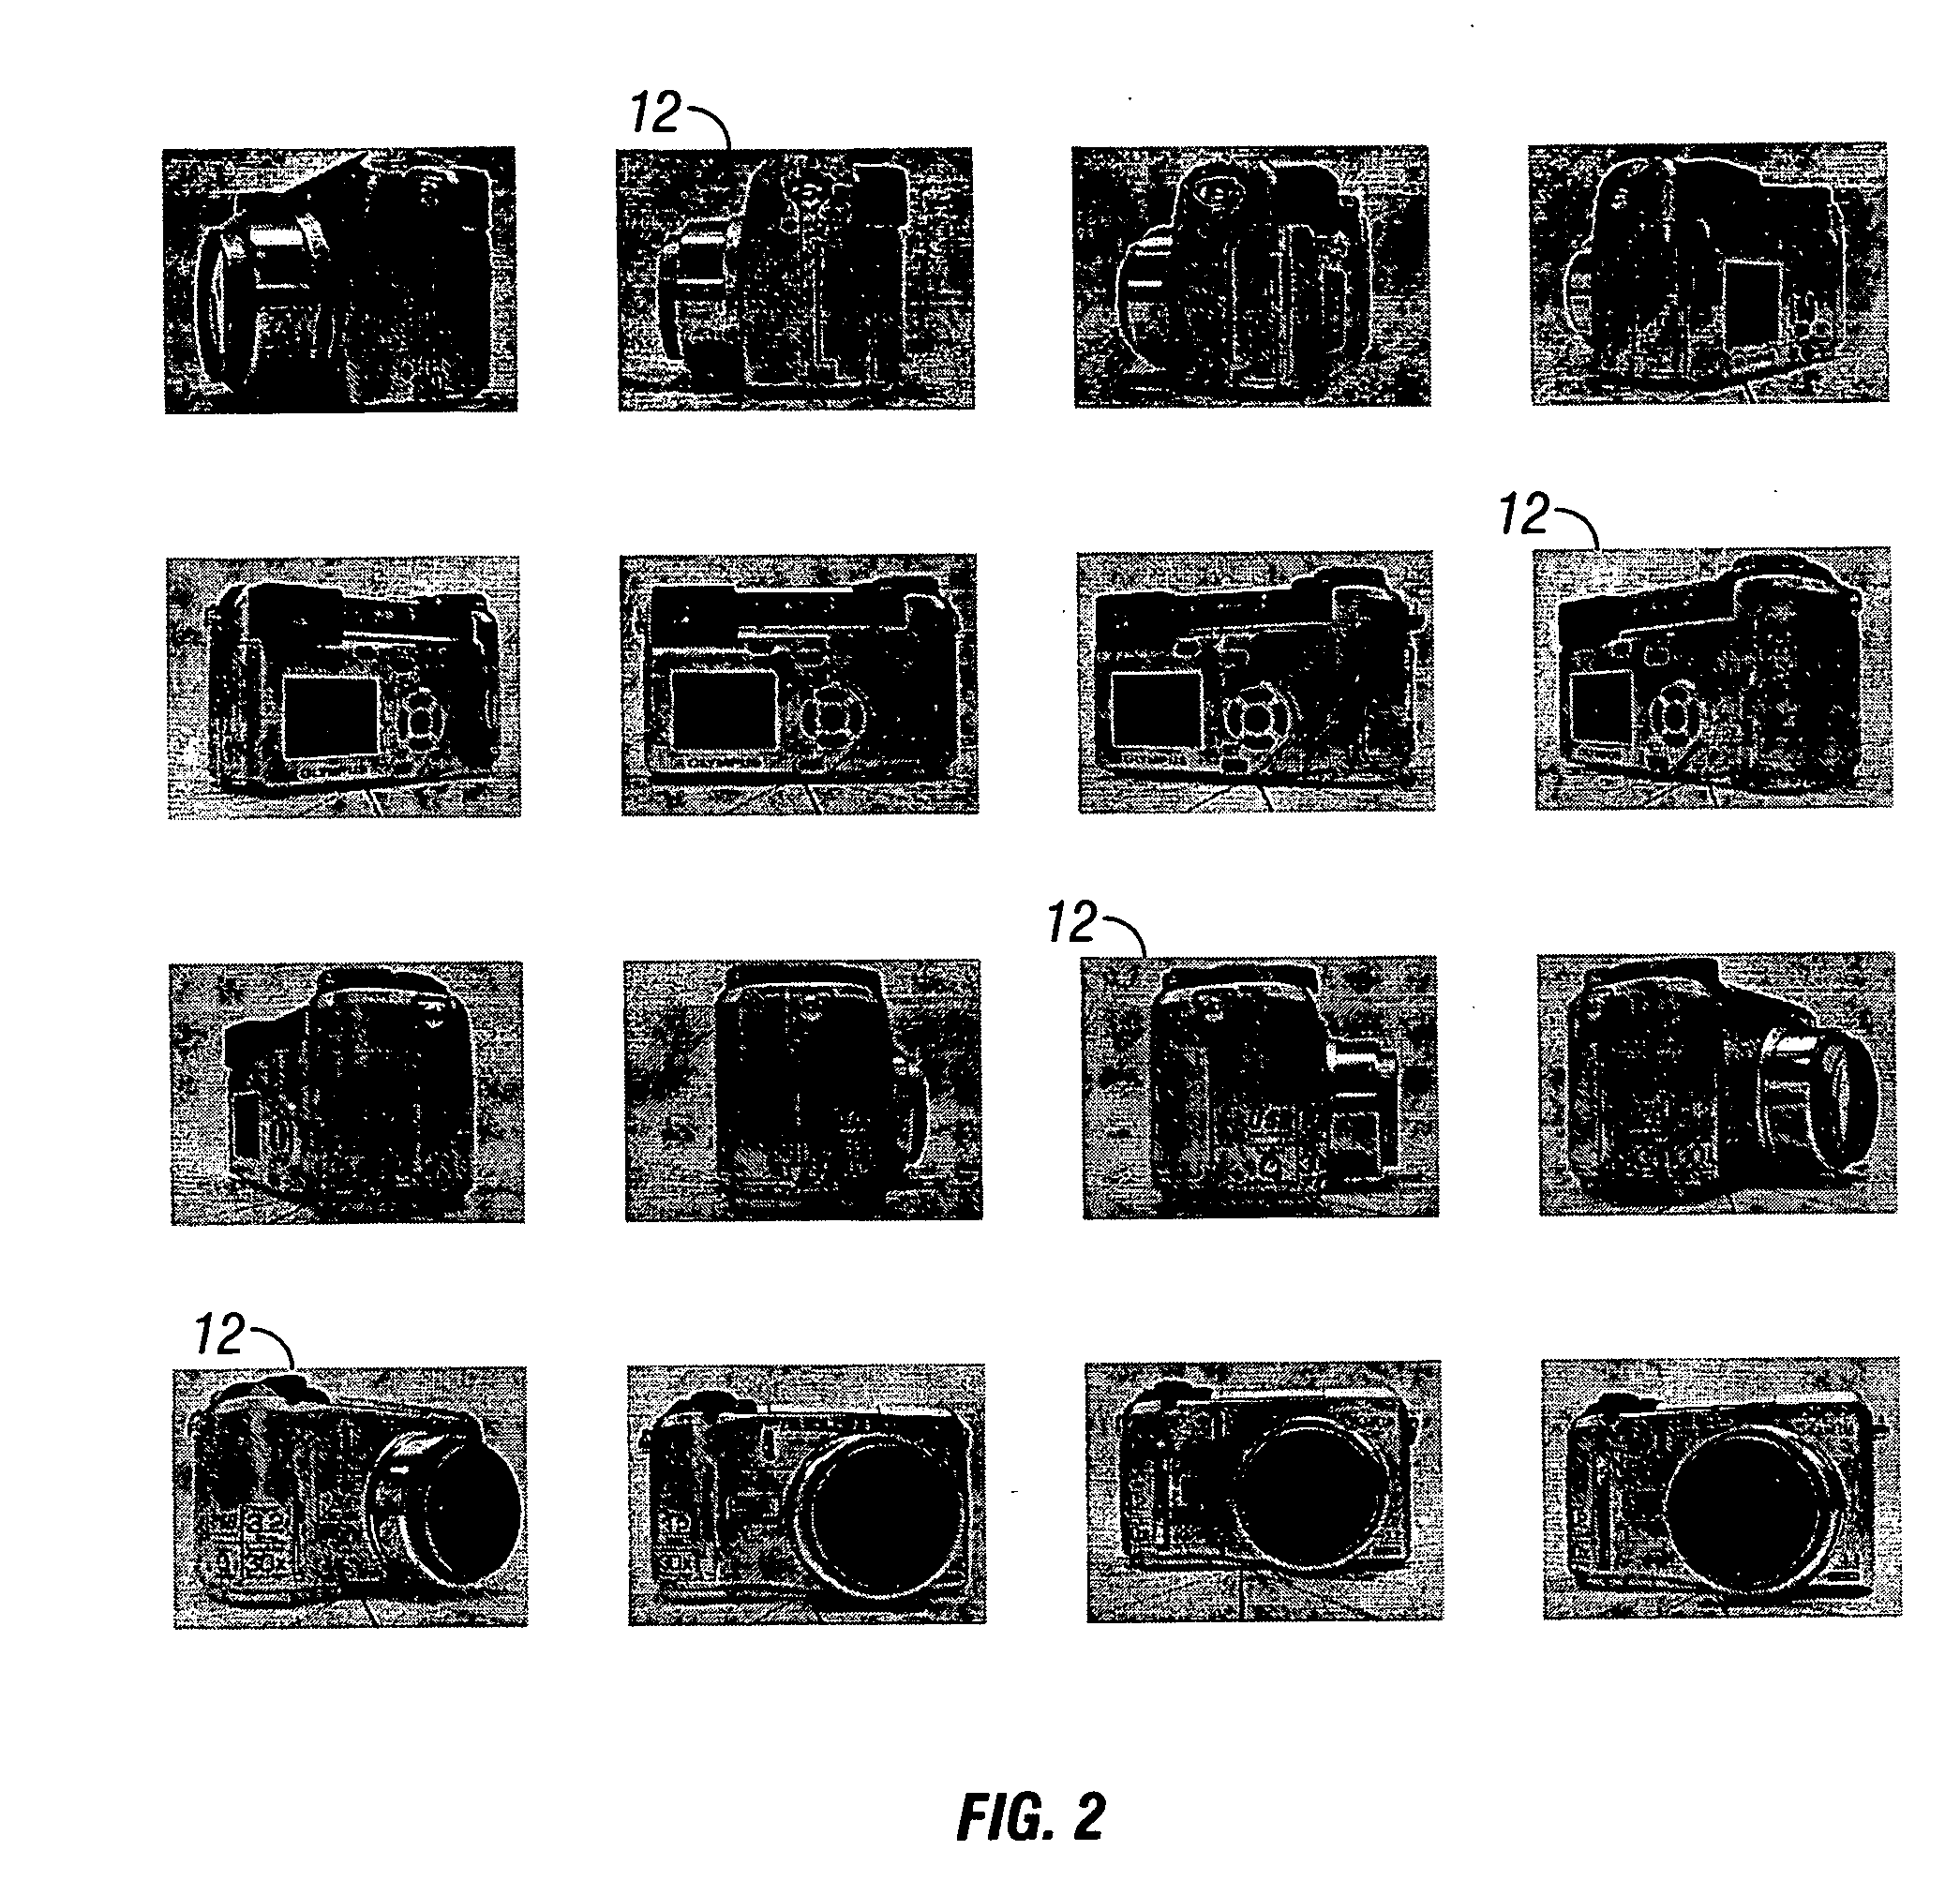 System for delivering and enabling interactivity with images